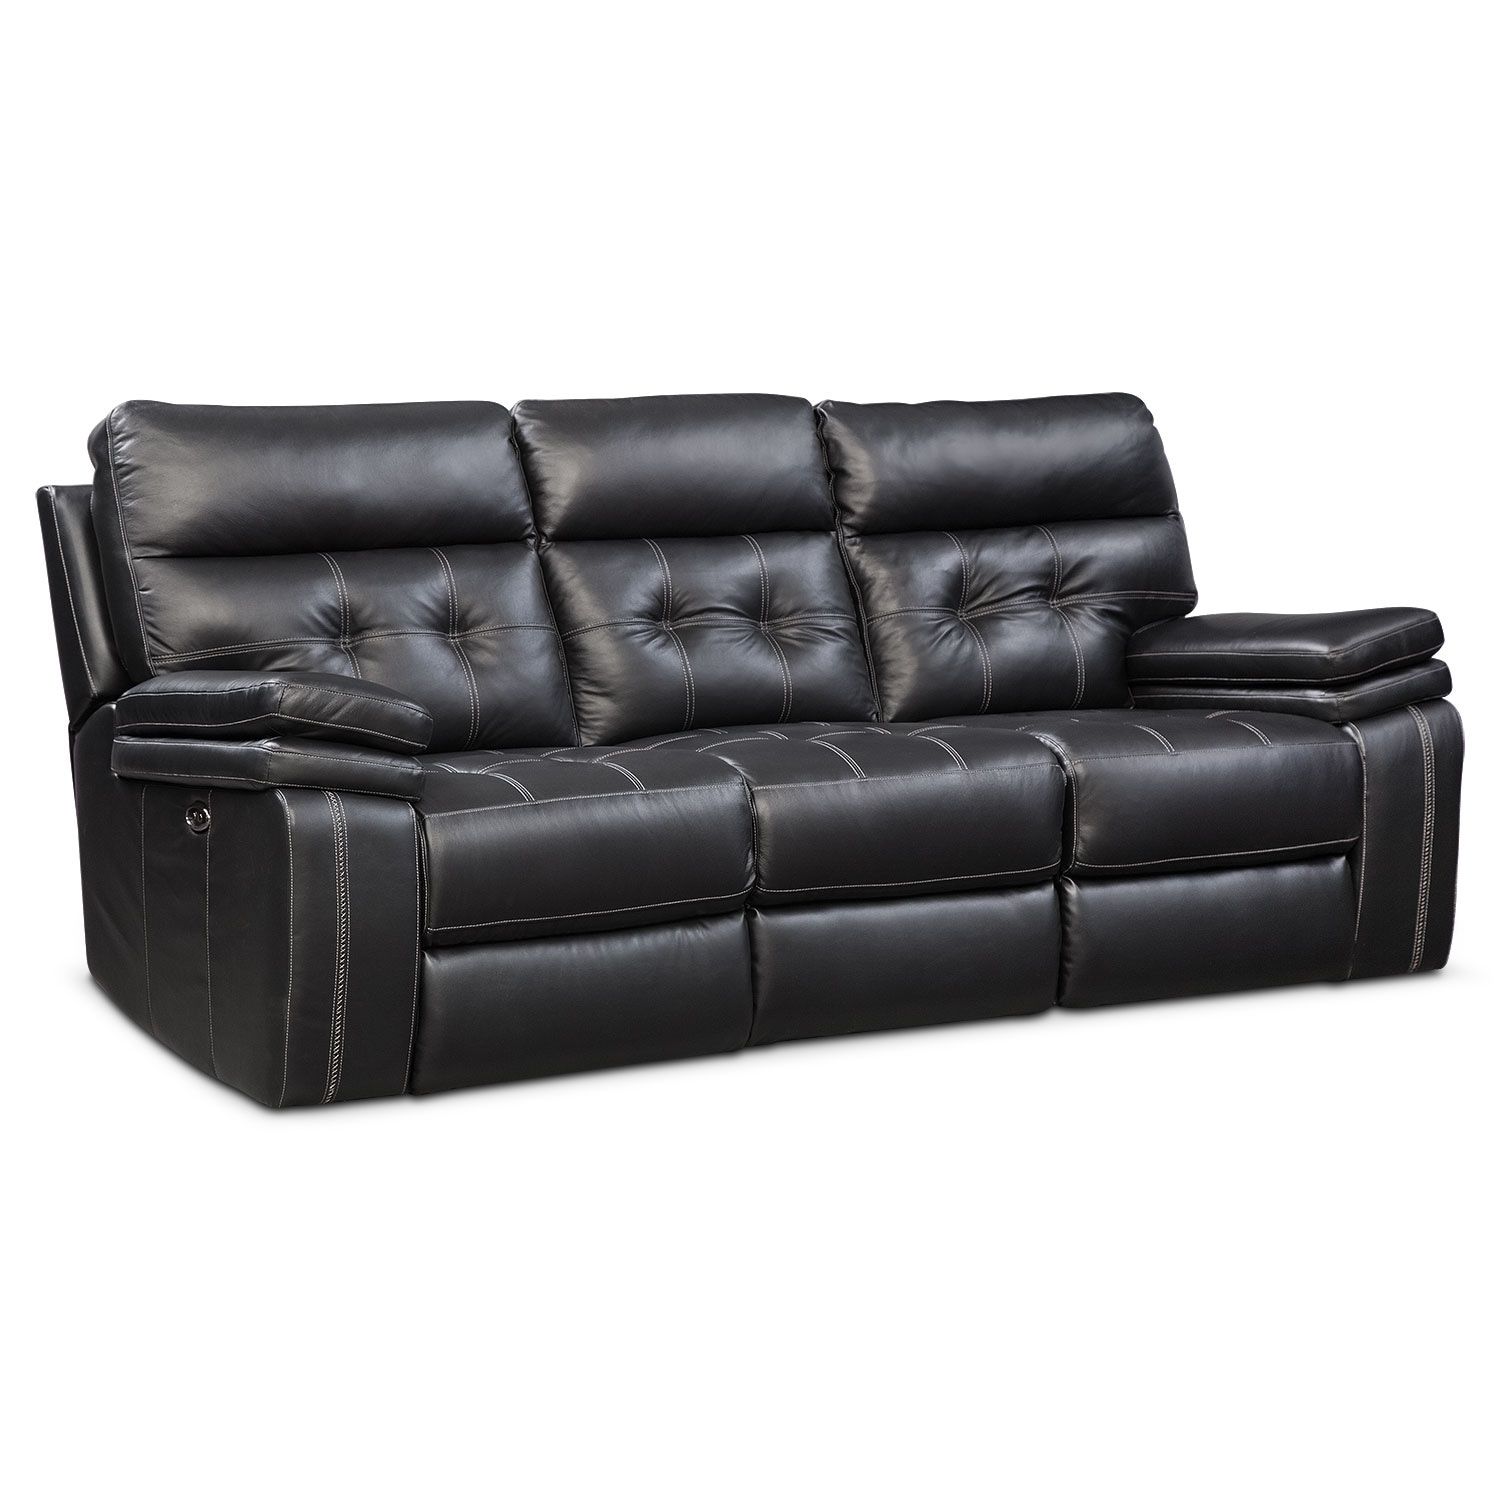 Sofas And Couches | Living Room Seating | Value City Furniture And Pertaining To Aquarius Dark Grey 2 Piece Sectionals With Laf Chaise (View 18 of 30)